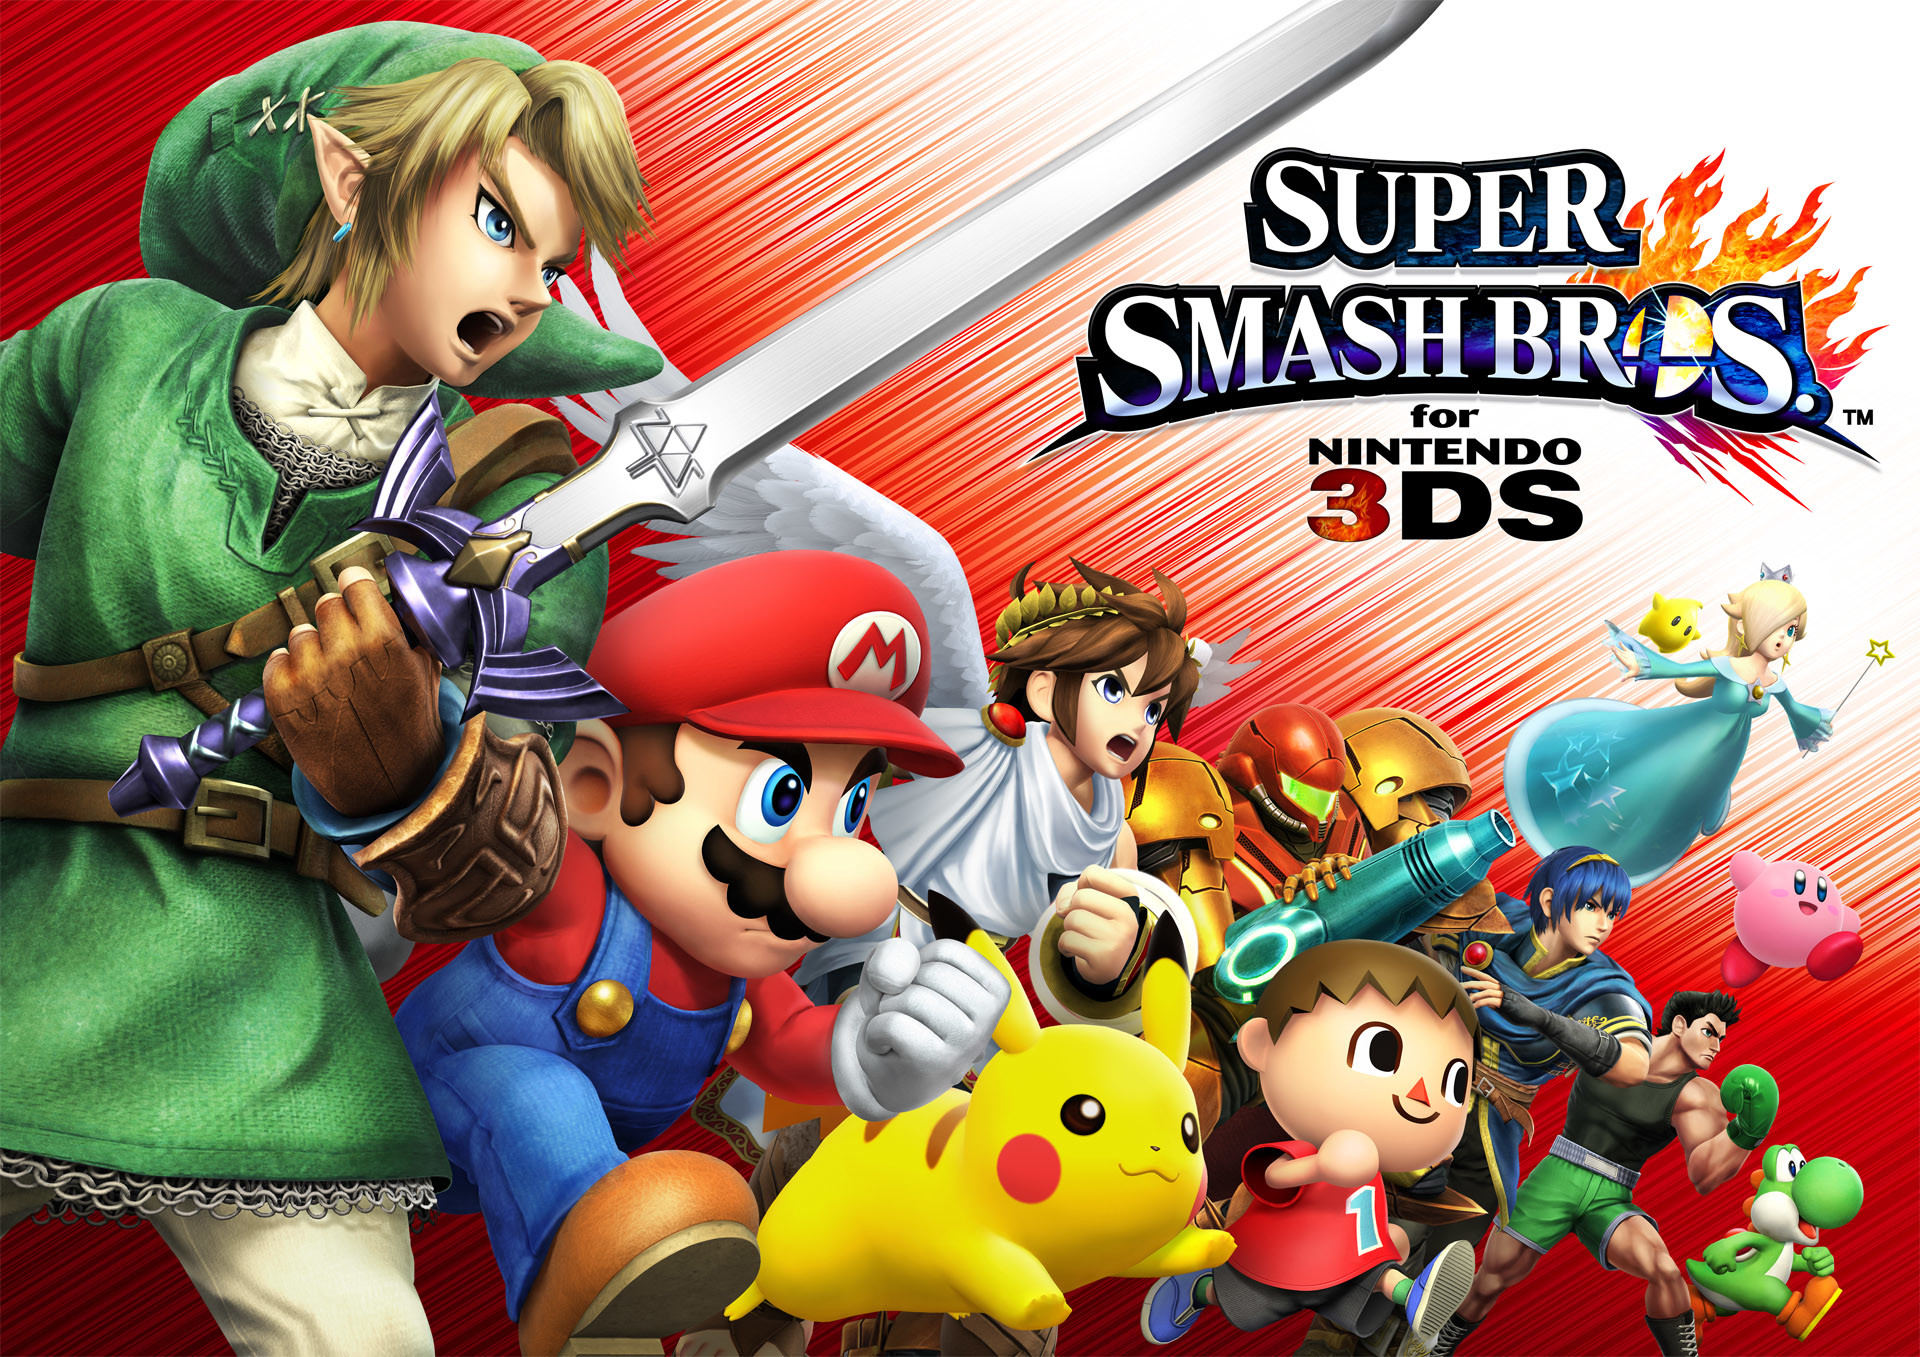 1920x1357 Super Smash Bros. for Nintendo 3DS and Wii U HD Wallpaper 11 - 1920 X